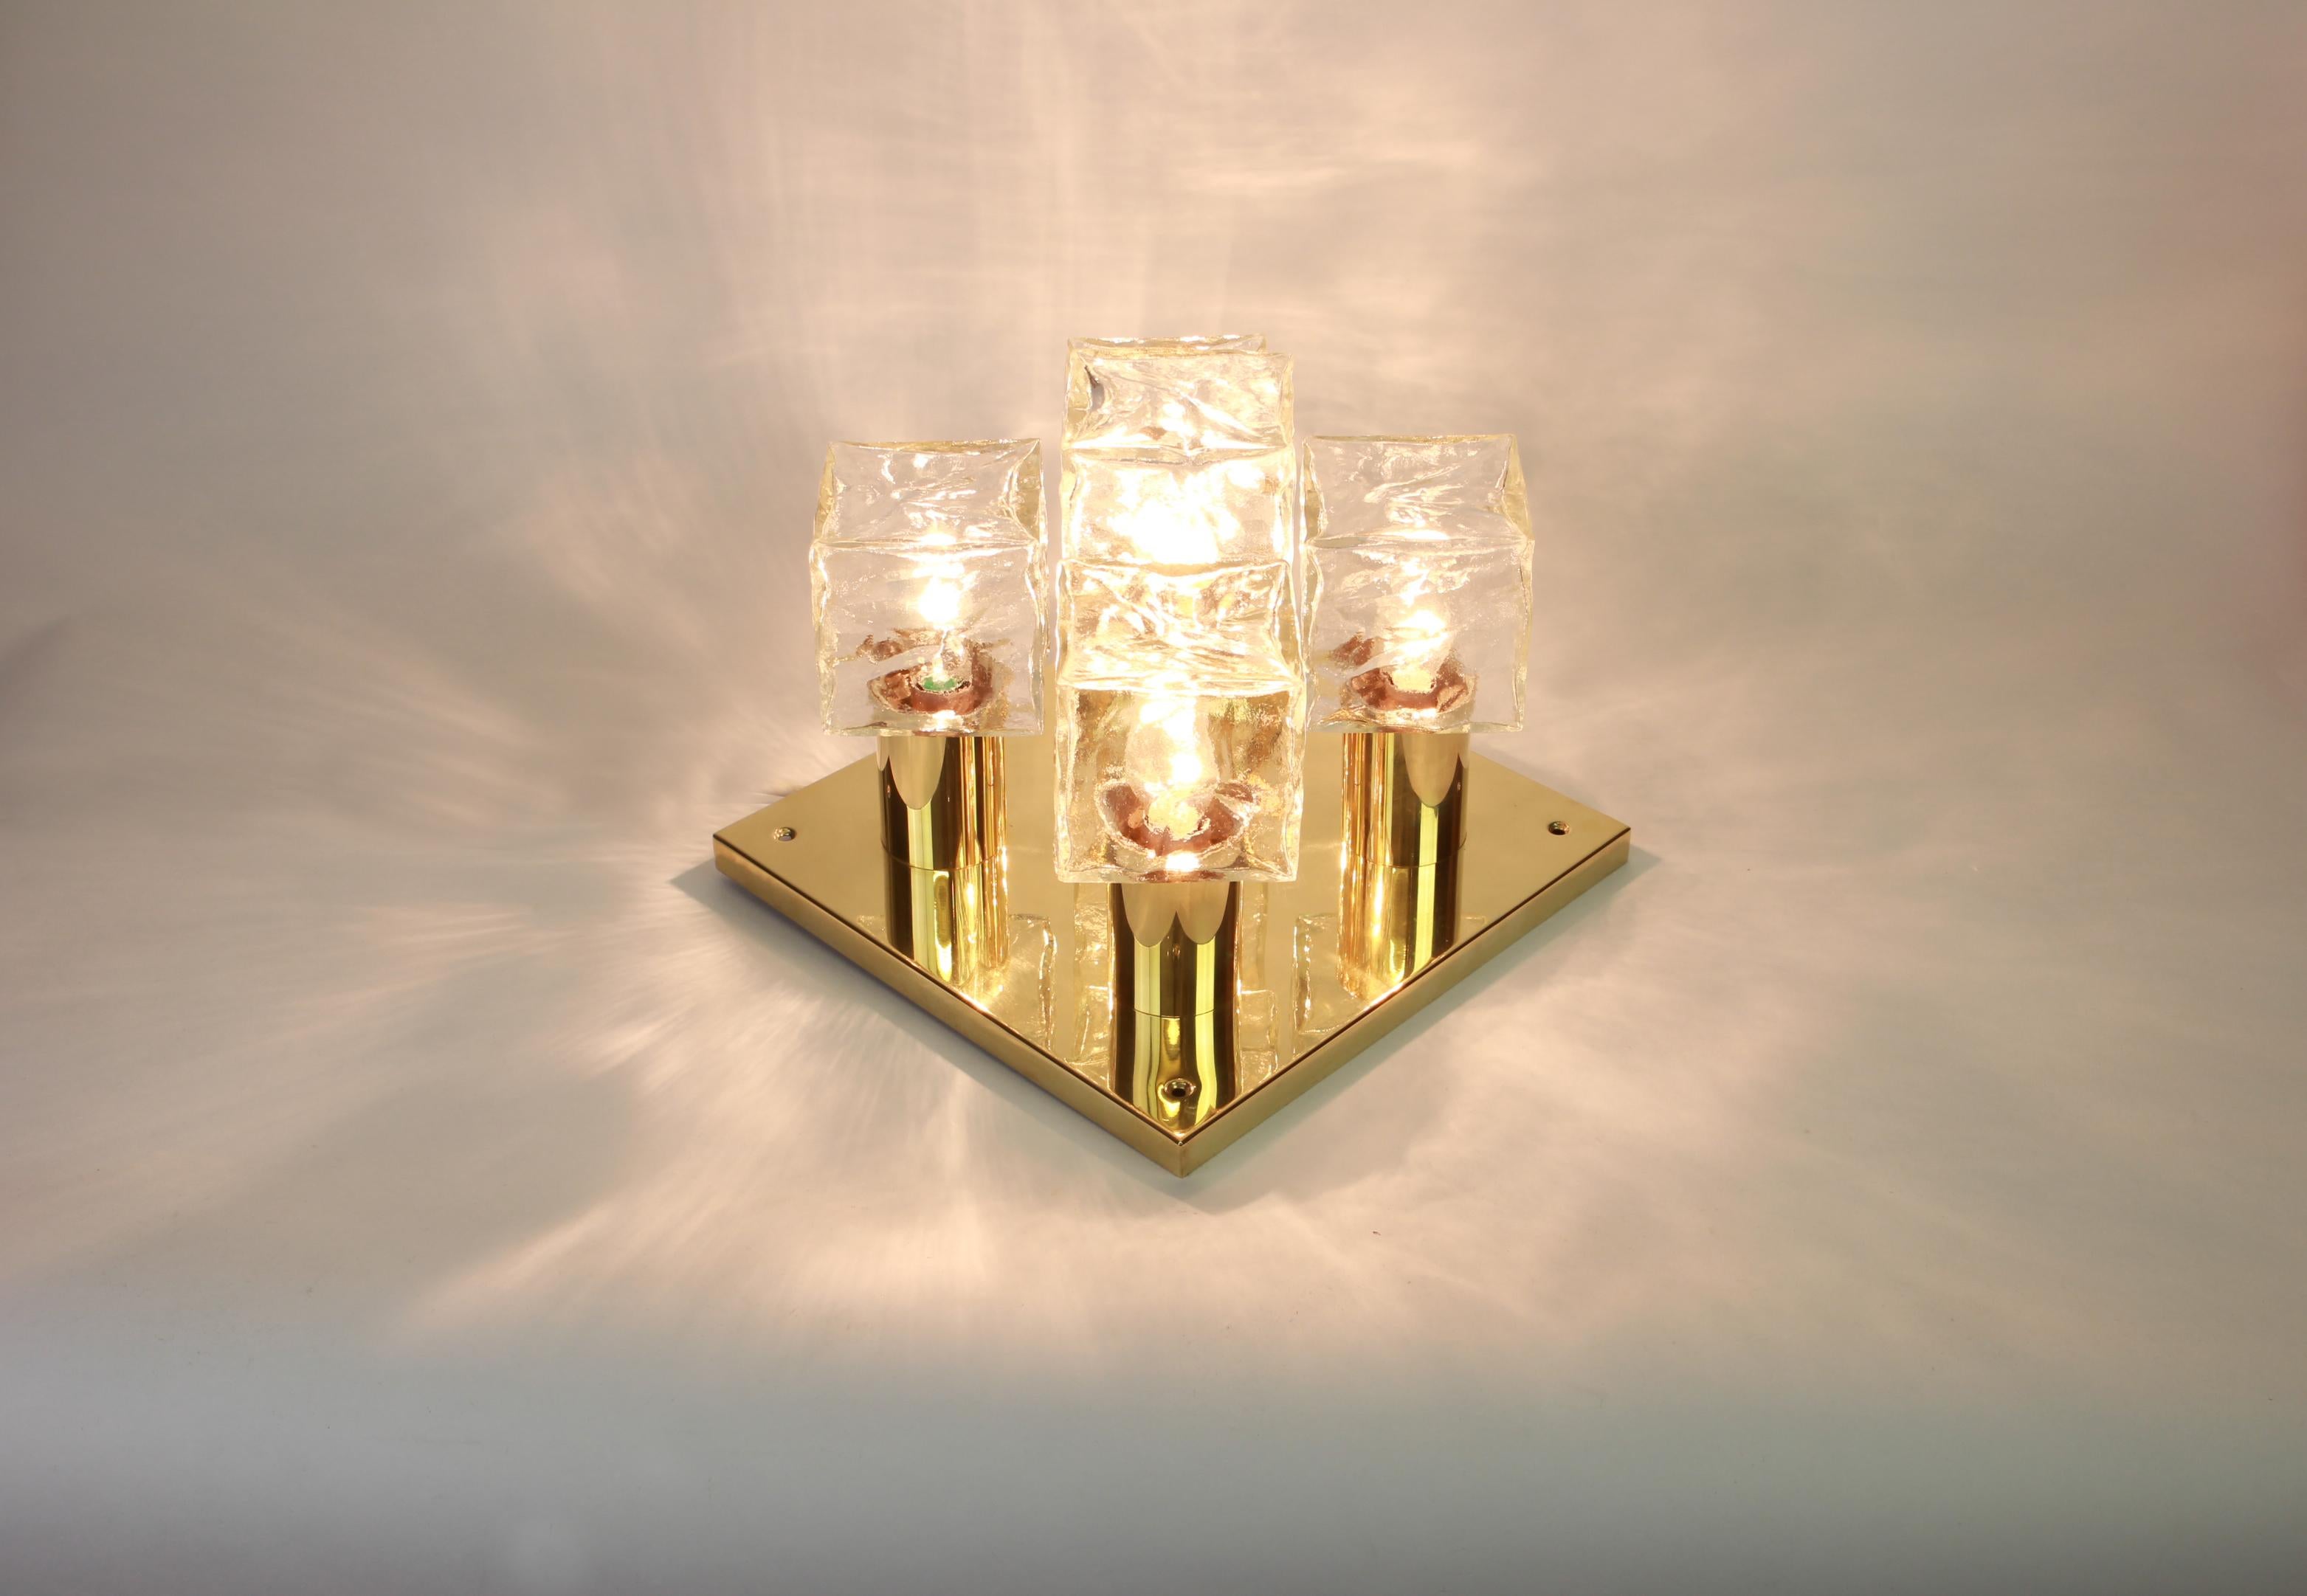 A stunning large flushmount by Kalmar, Austria, manufactured in the 1960s.
The flush mount is composed of a 5 thick textured ice glass elements attached to a brass metal frame.
Wonderful lights effect.

Heavy quality and in very good condition.